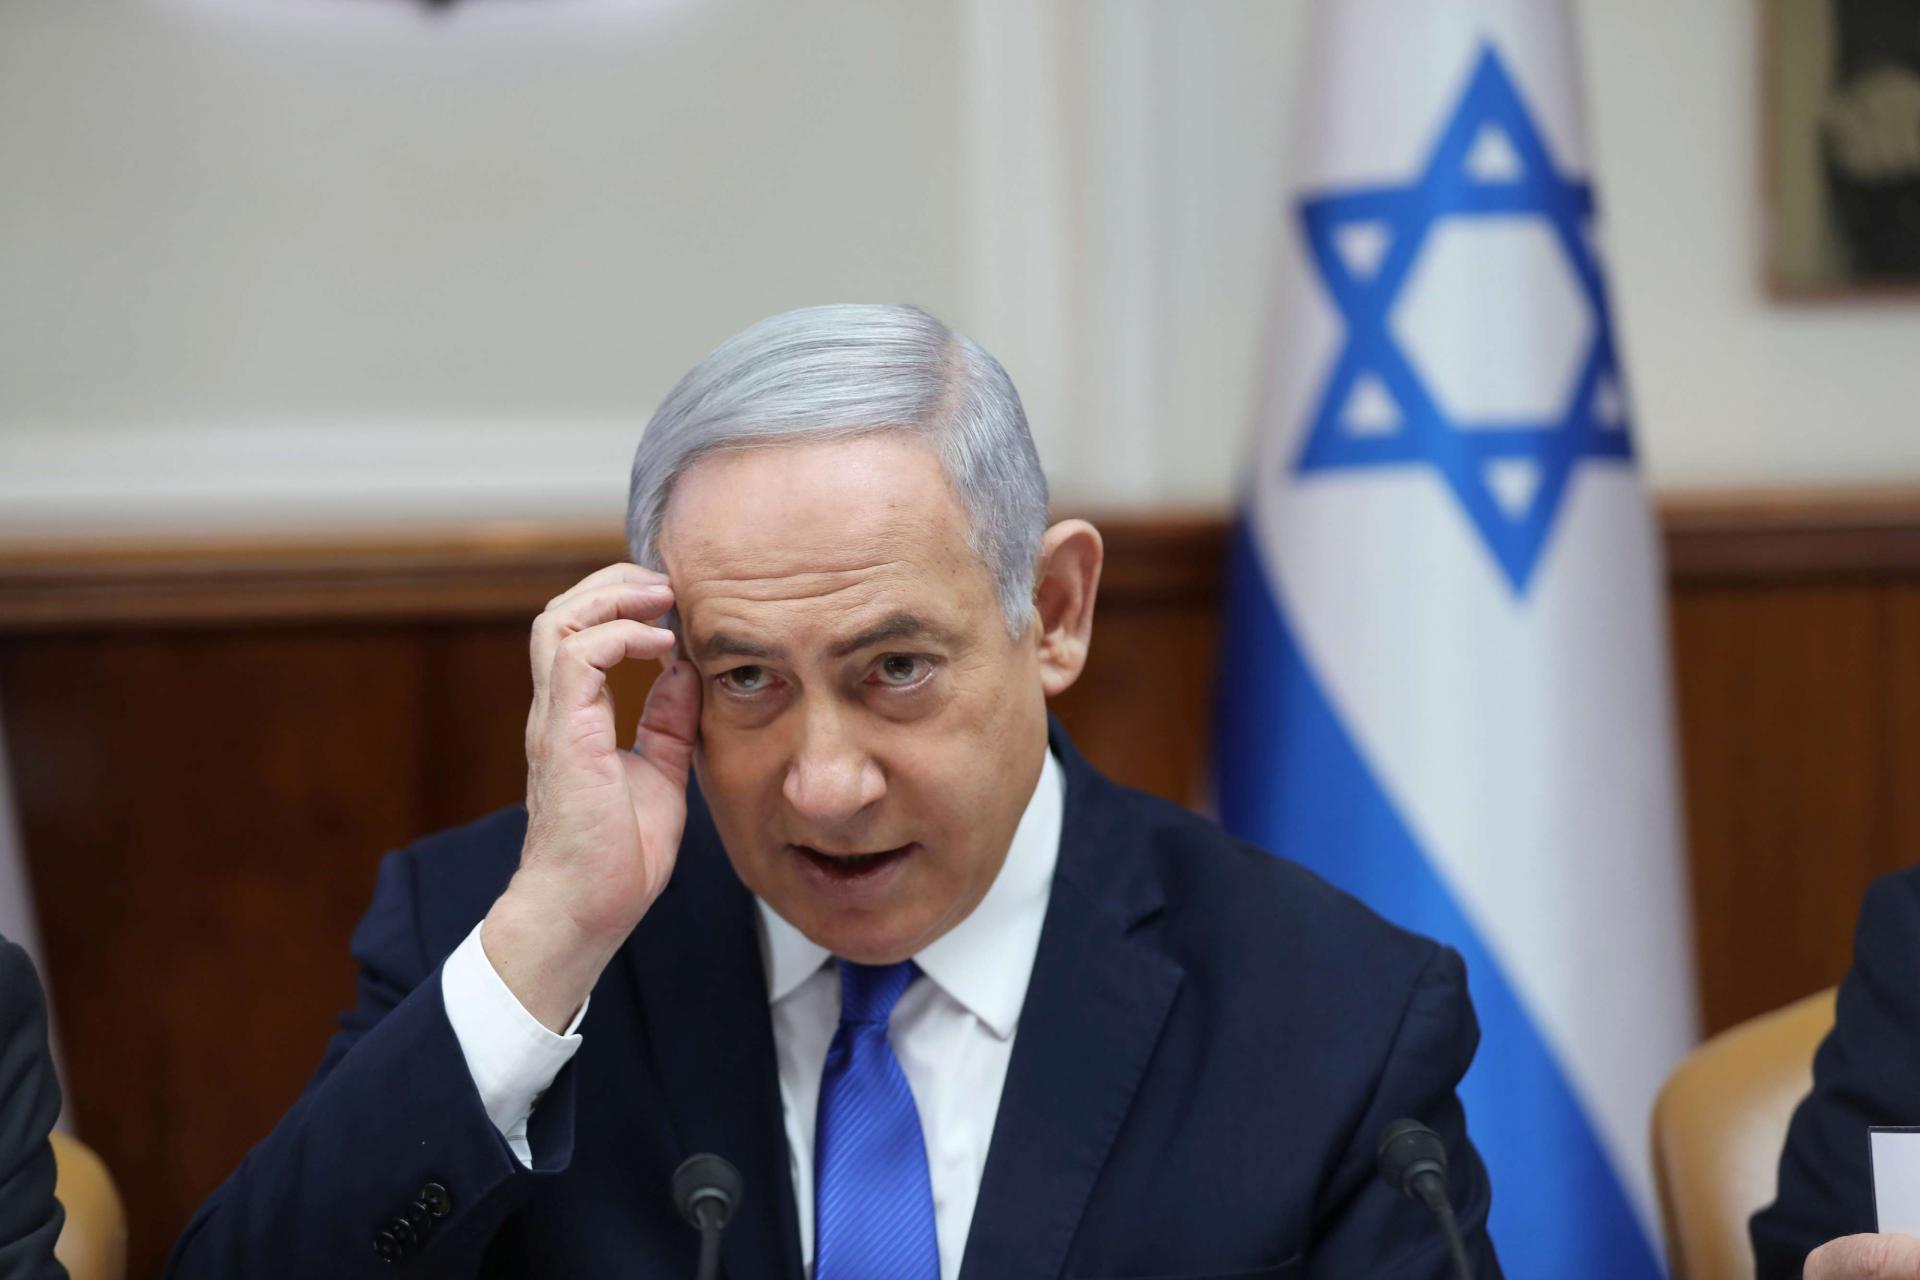 Netanyahu is accused of bribing media moguls for favourable press and expensive gifts in return